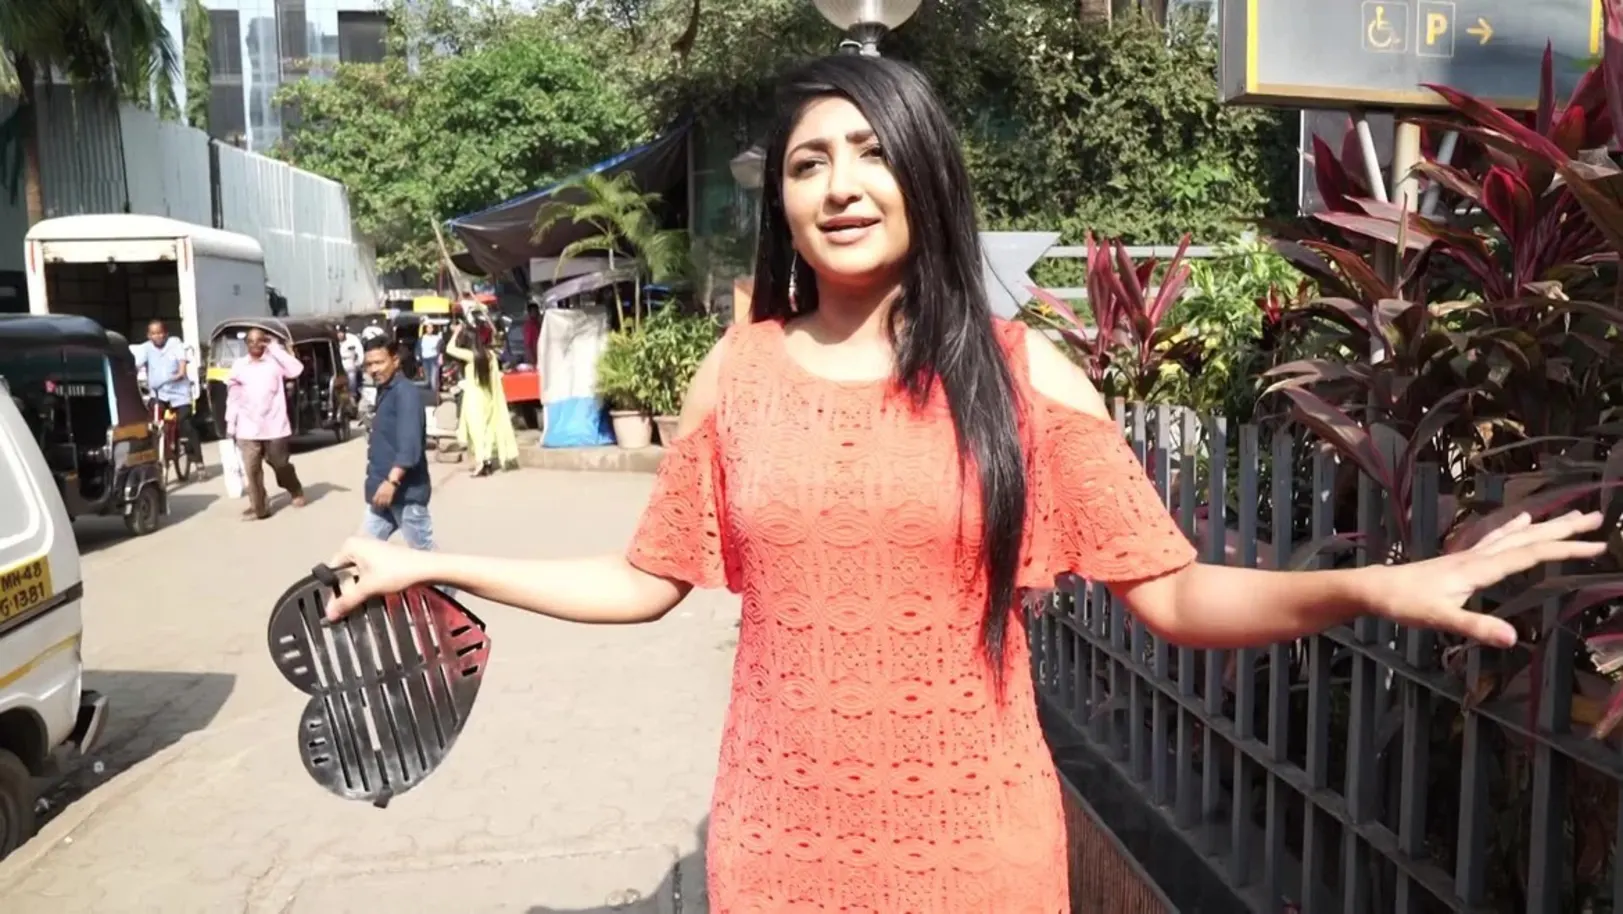 Unique promotion on Mumbai's busy streets - Love Me India Kids Highlights 8th October 2018 Webisode